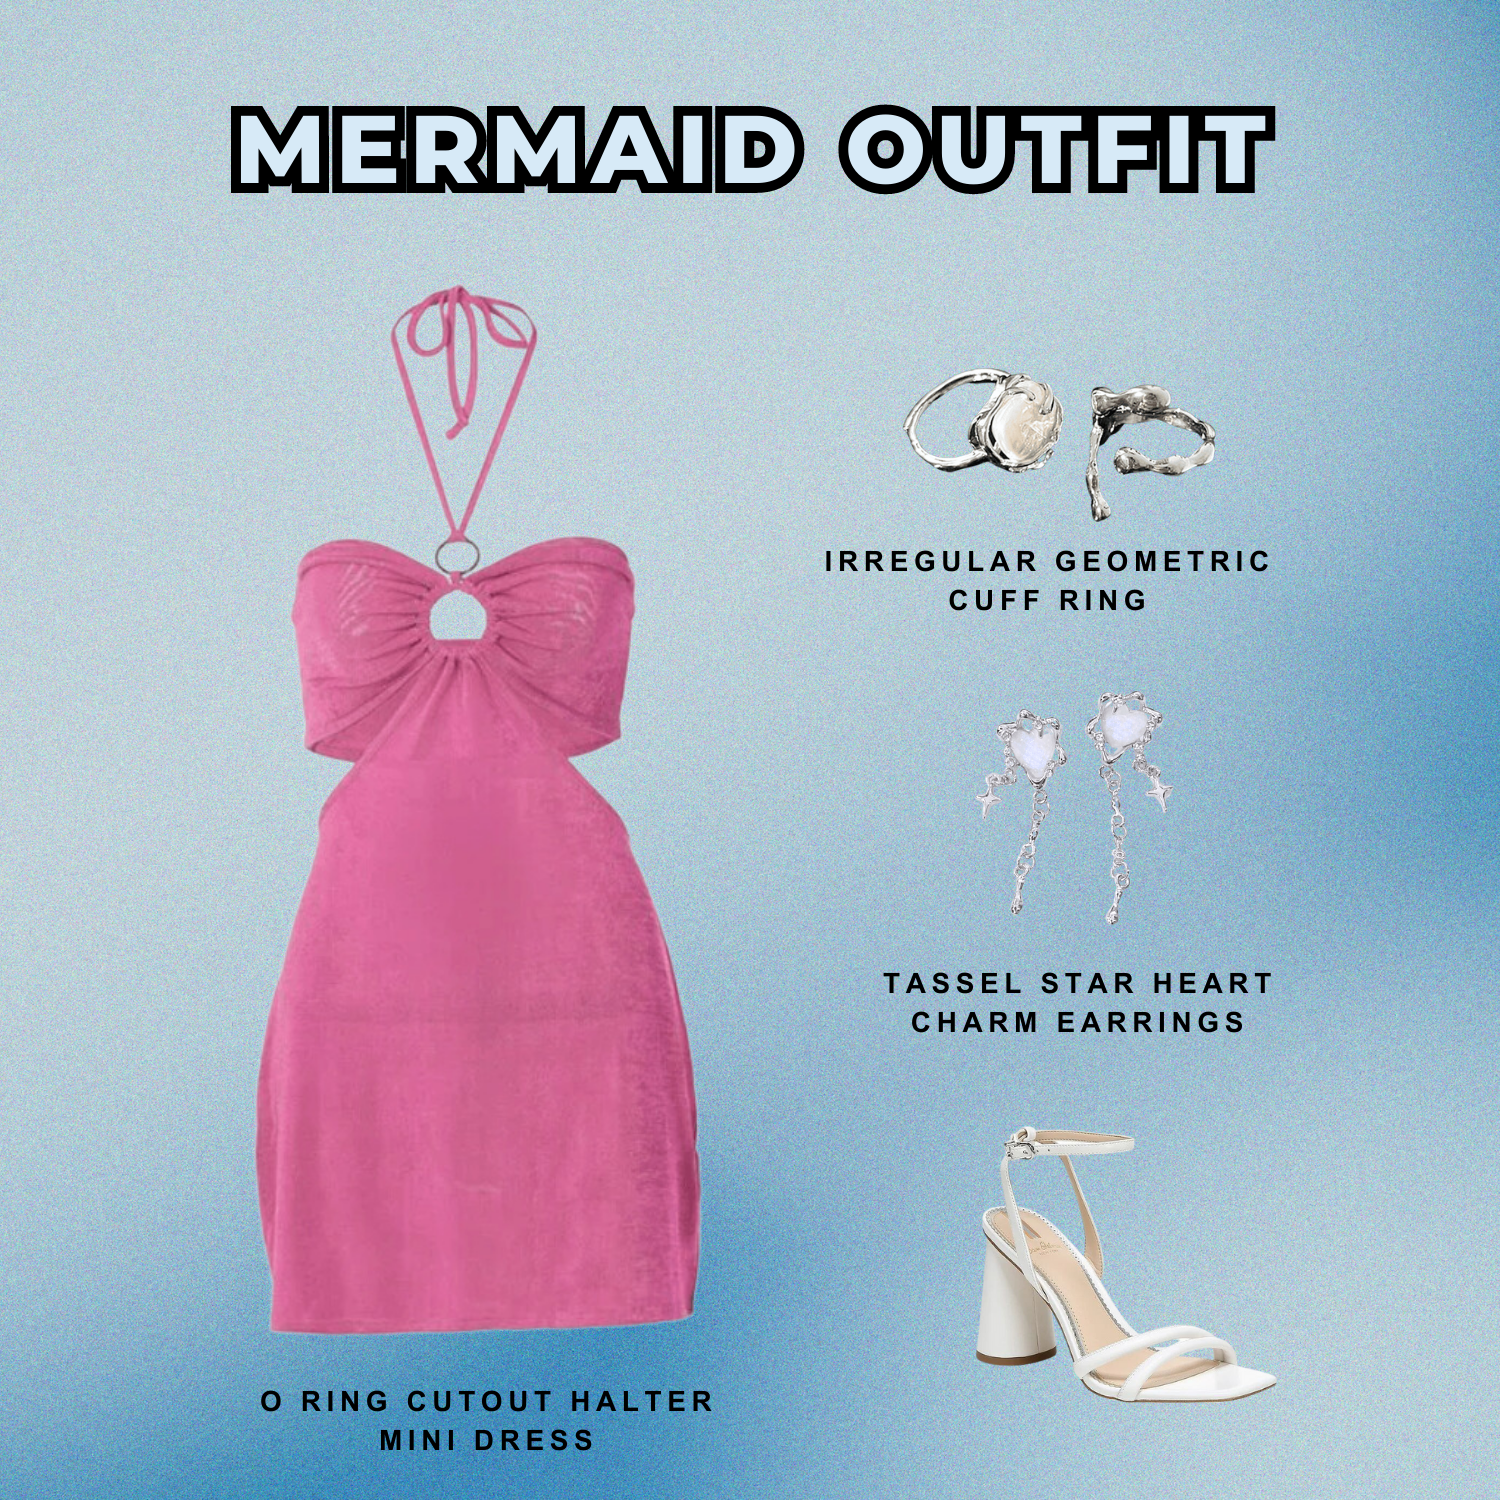 Mermaid Outfits - AnotherChill